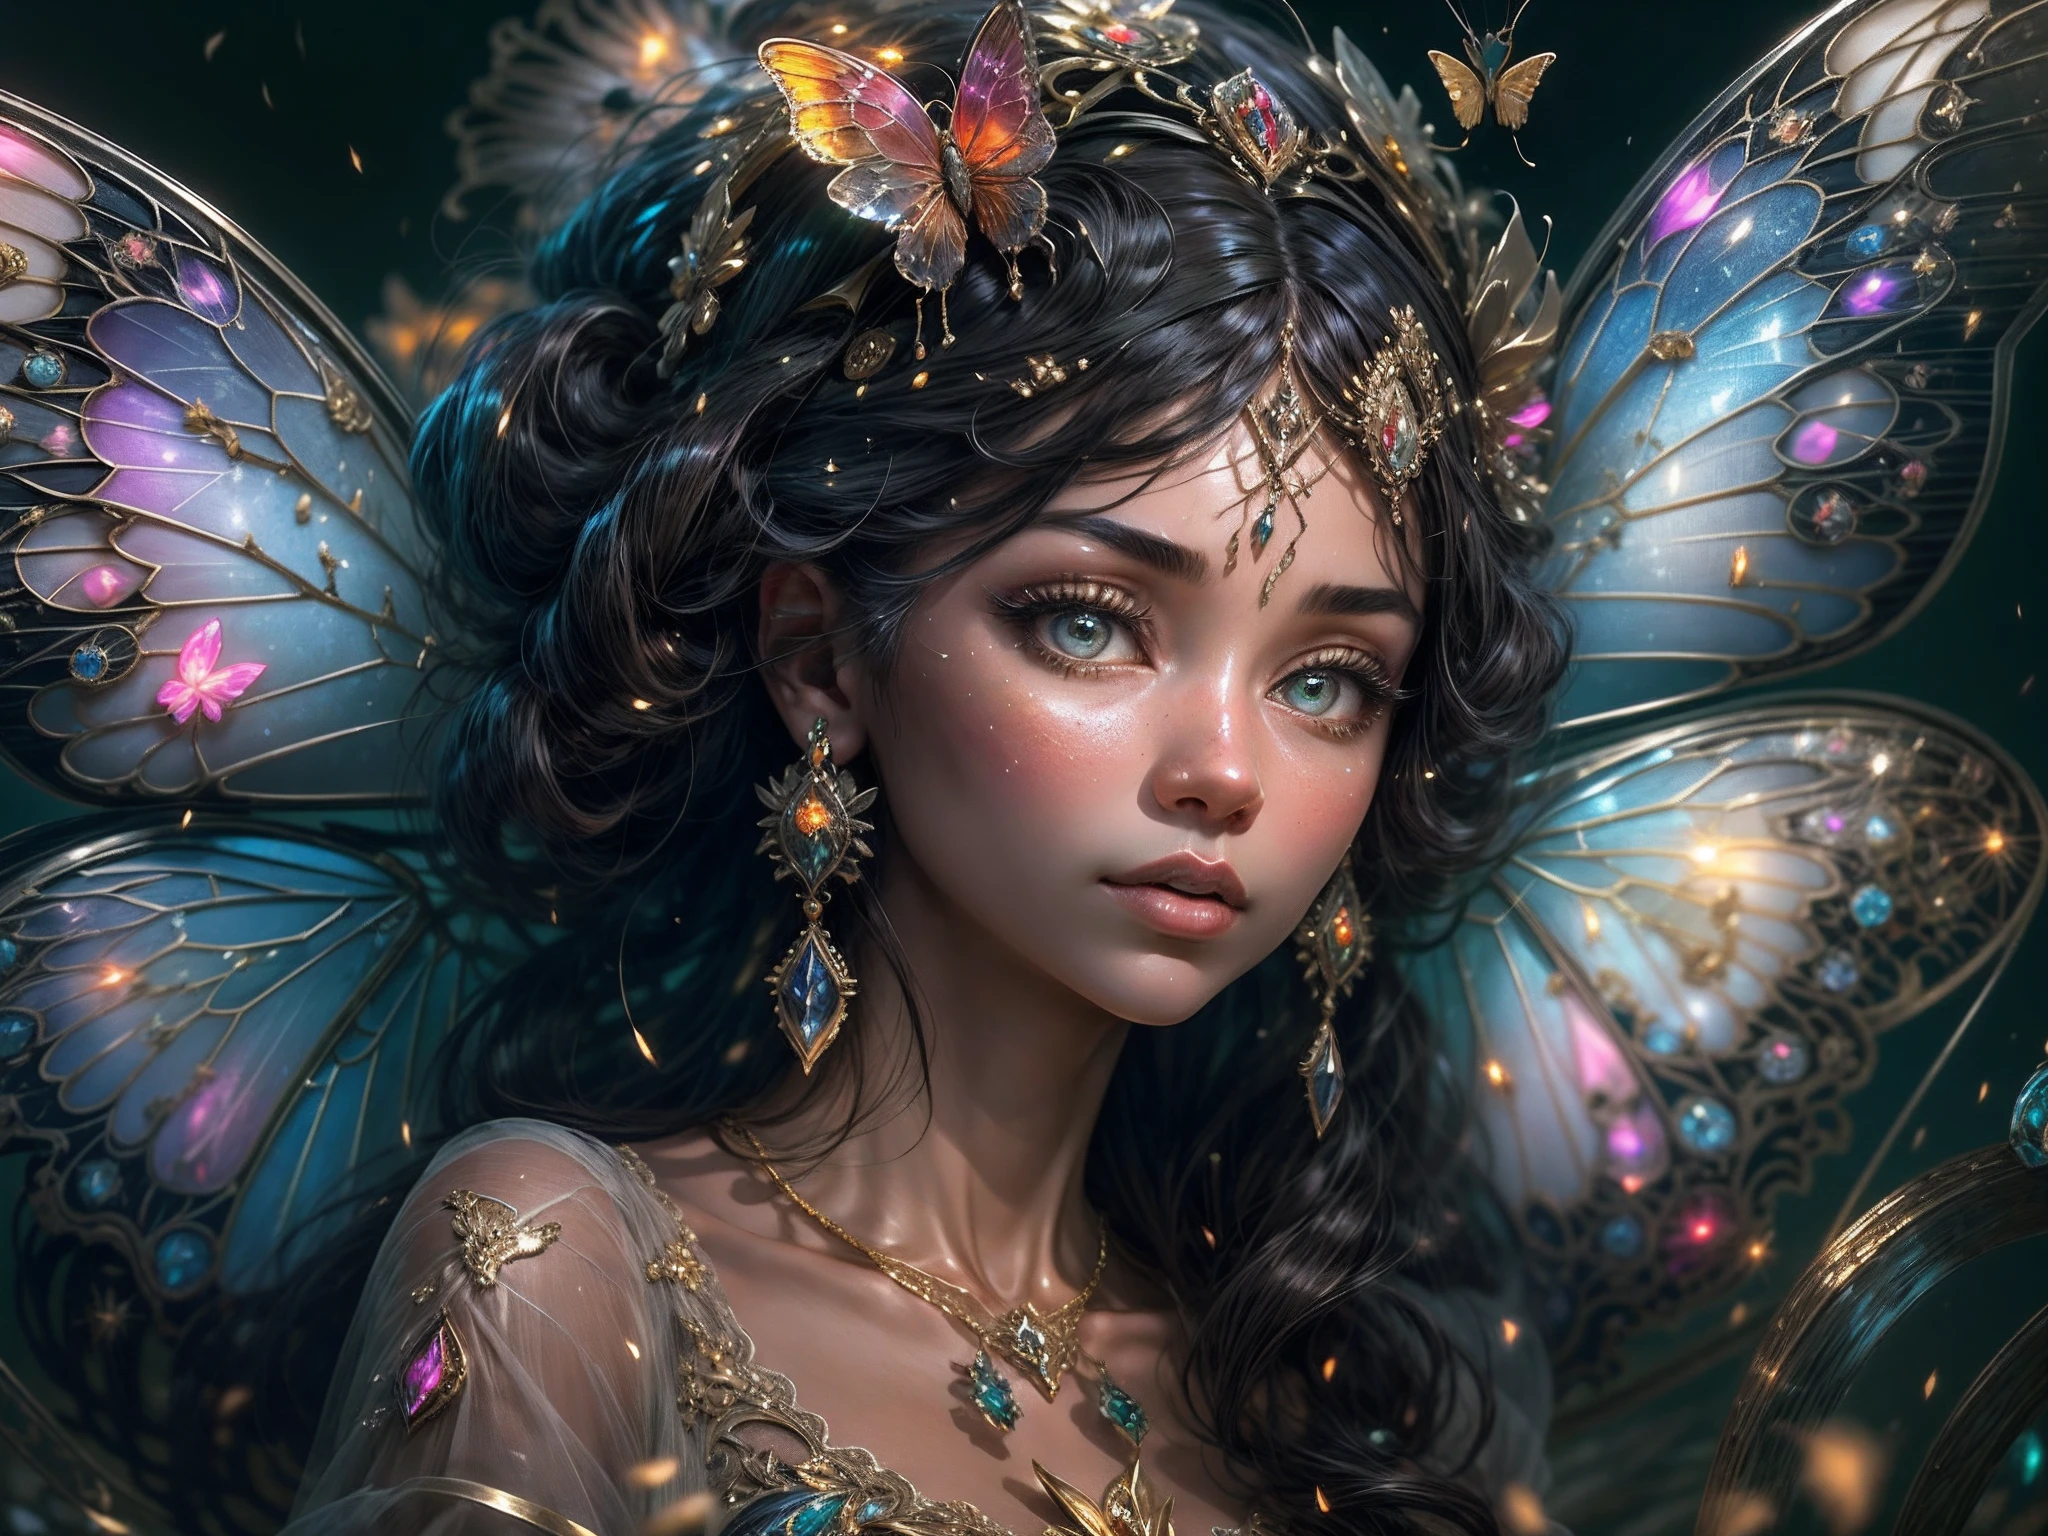 This is a realistic fantasy masterpiece with lots of shimmer, glitter, and intricate ornate detail. Generate one  woman with a beautiful and delicate crown sitting on a garden swing at night. She is a beautiful and seductive butterfly queen with stunning curly black hair, (((incredibly realistic and detailed dynamic eyes in bright colors with realistic shading))).  Her skin is translucent white, her eyes sparkle, and her dress is elegant. Her dress is spun of the finest gossamer silk with delicate, intricate, and subtle floral detailing and gold silk butterfly sleeves. Her face is lovely and lonely. Include glow-in-the-dark flowers, lots of particles, highly realistic fantasy butteflies with translucent jewel-toned wings and fine detailing, and glow. The artwork is done in the style of Guviz and brings to mind masters in the genre such as trending fantasy works on Artstation and Midjourney. Camera: Utilize dynamic composition techniques to emphasize etherealness and delicate detail.